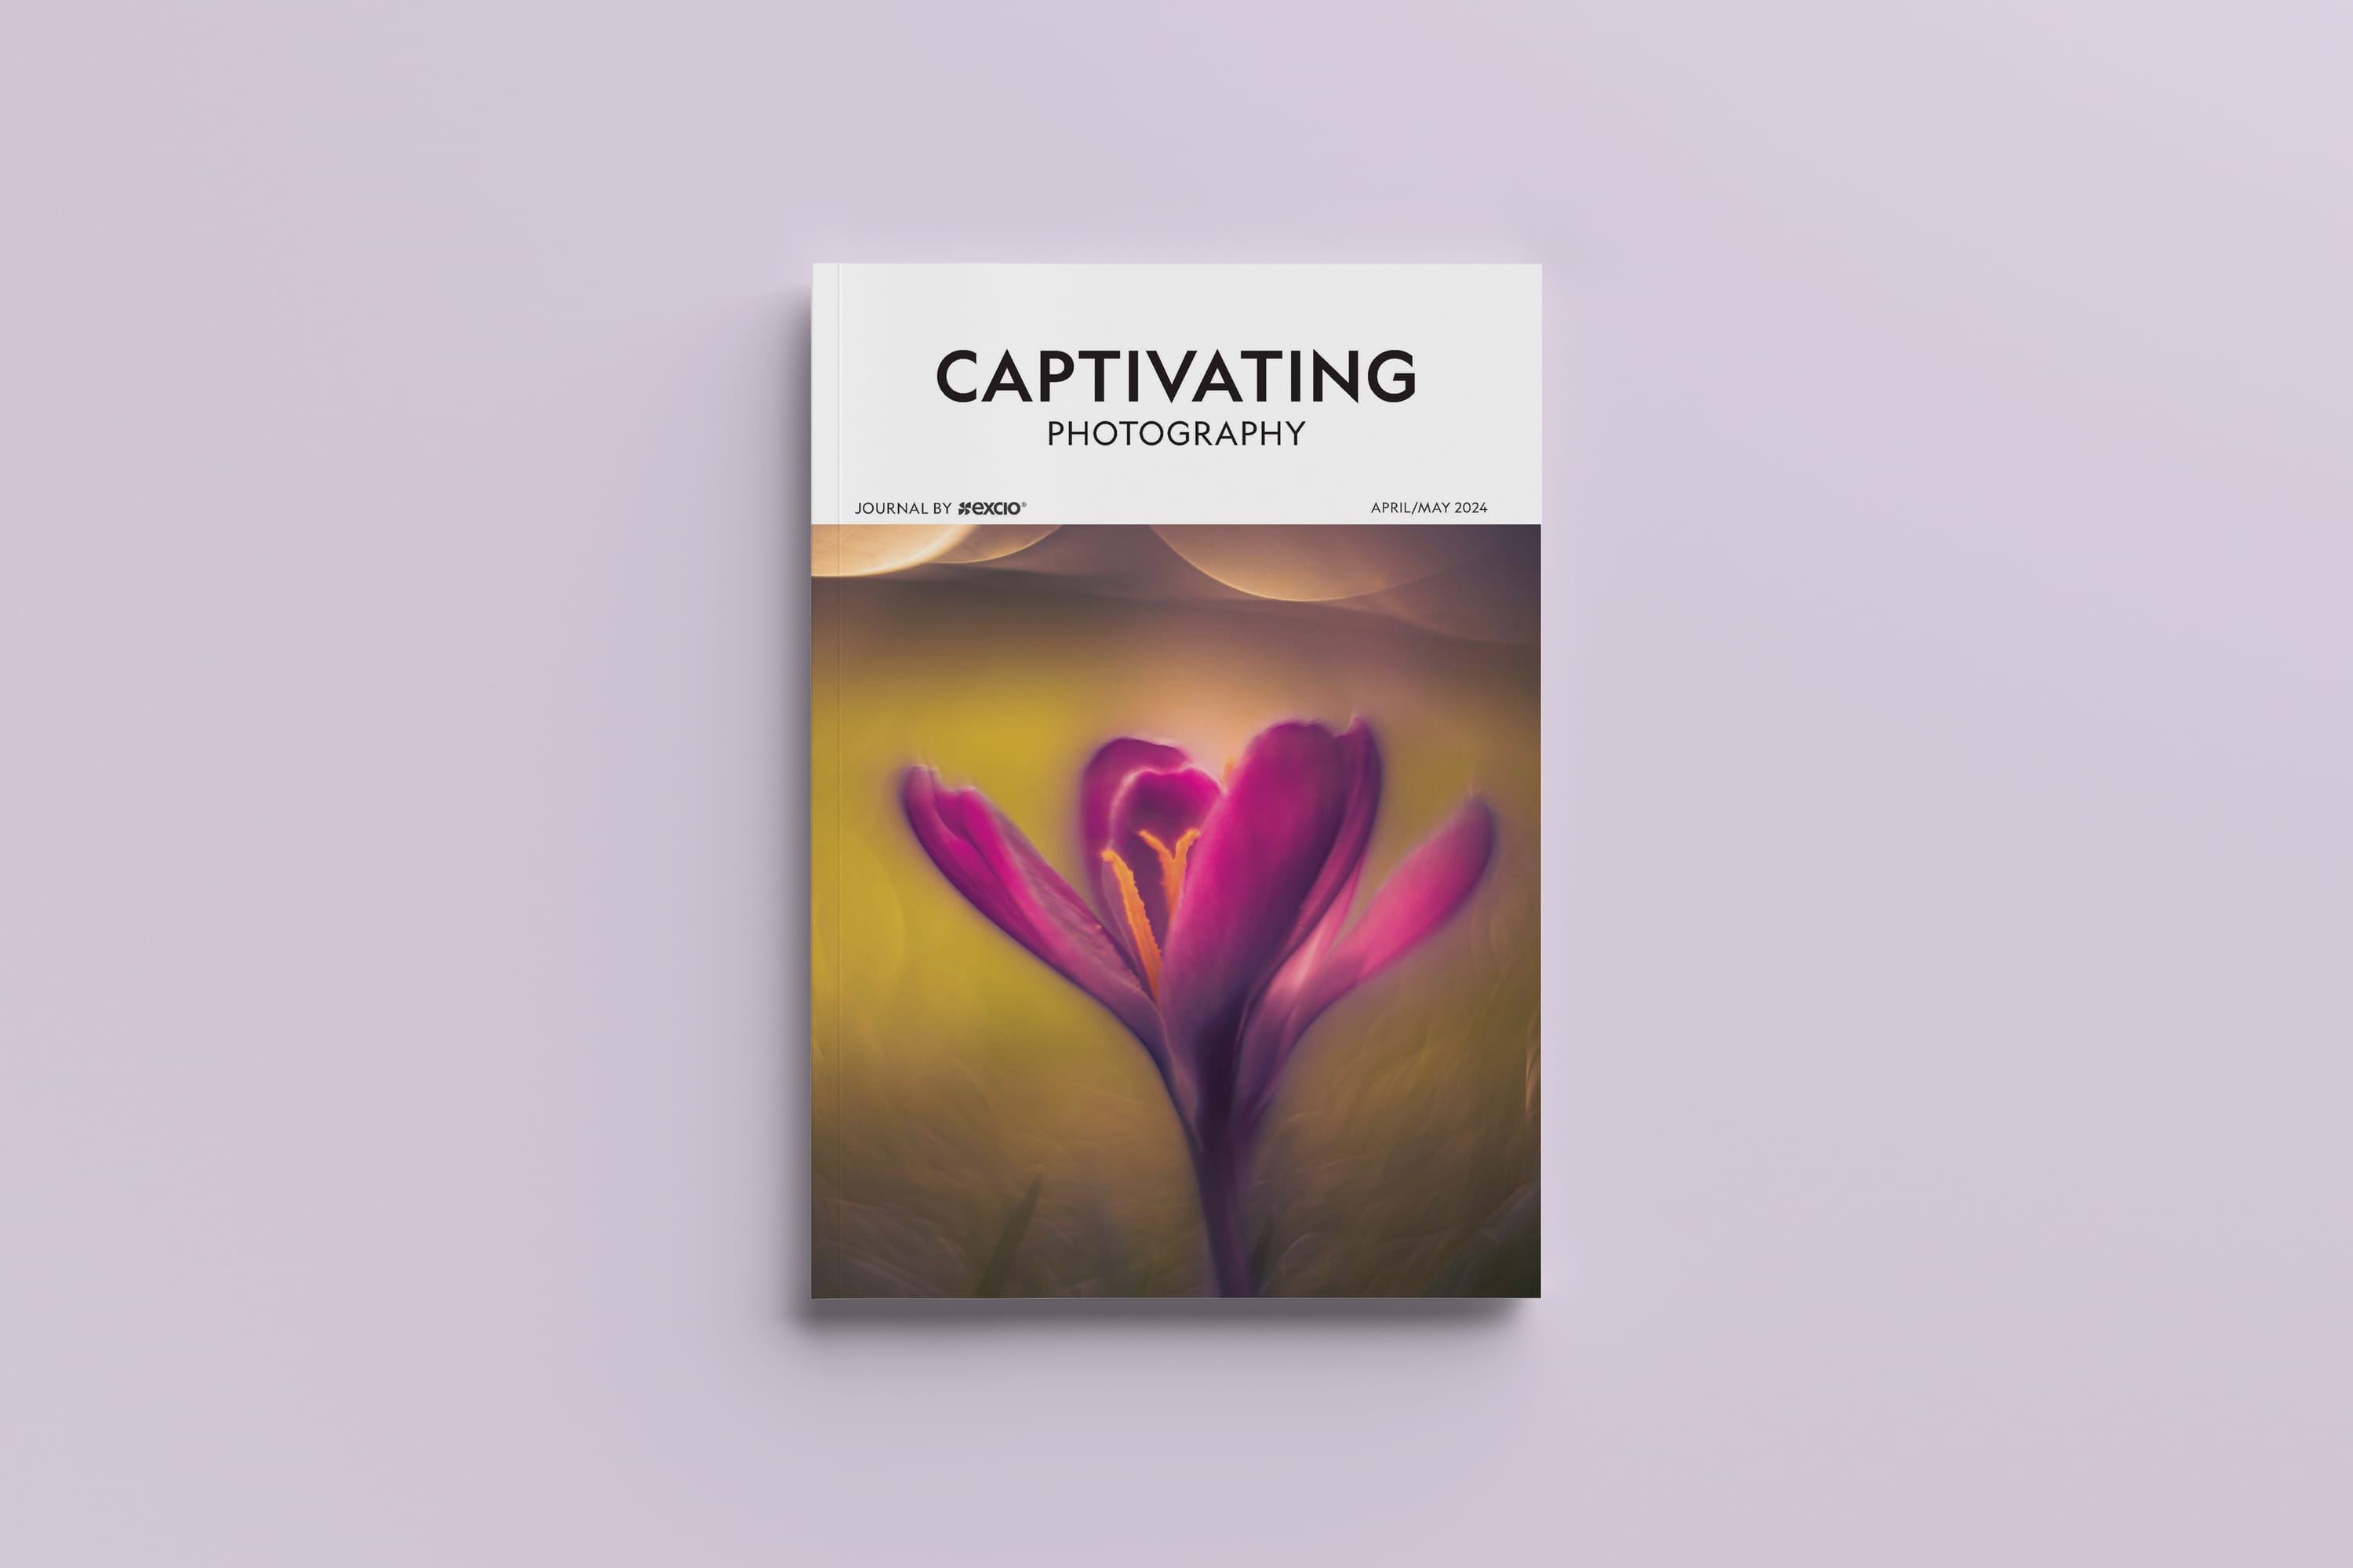 Issue 6 of Captivating Photography Journal is here